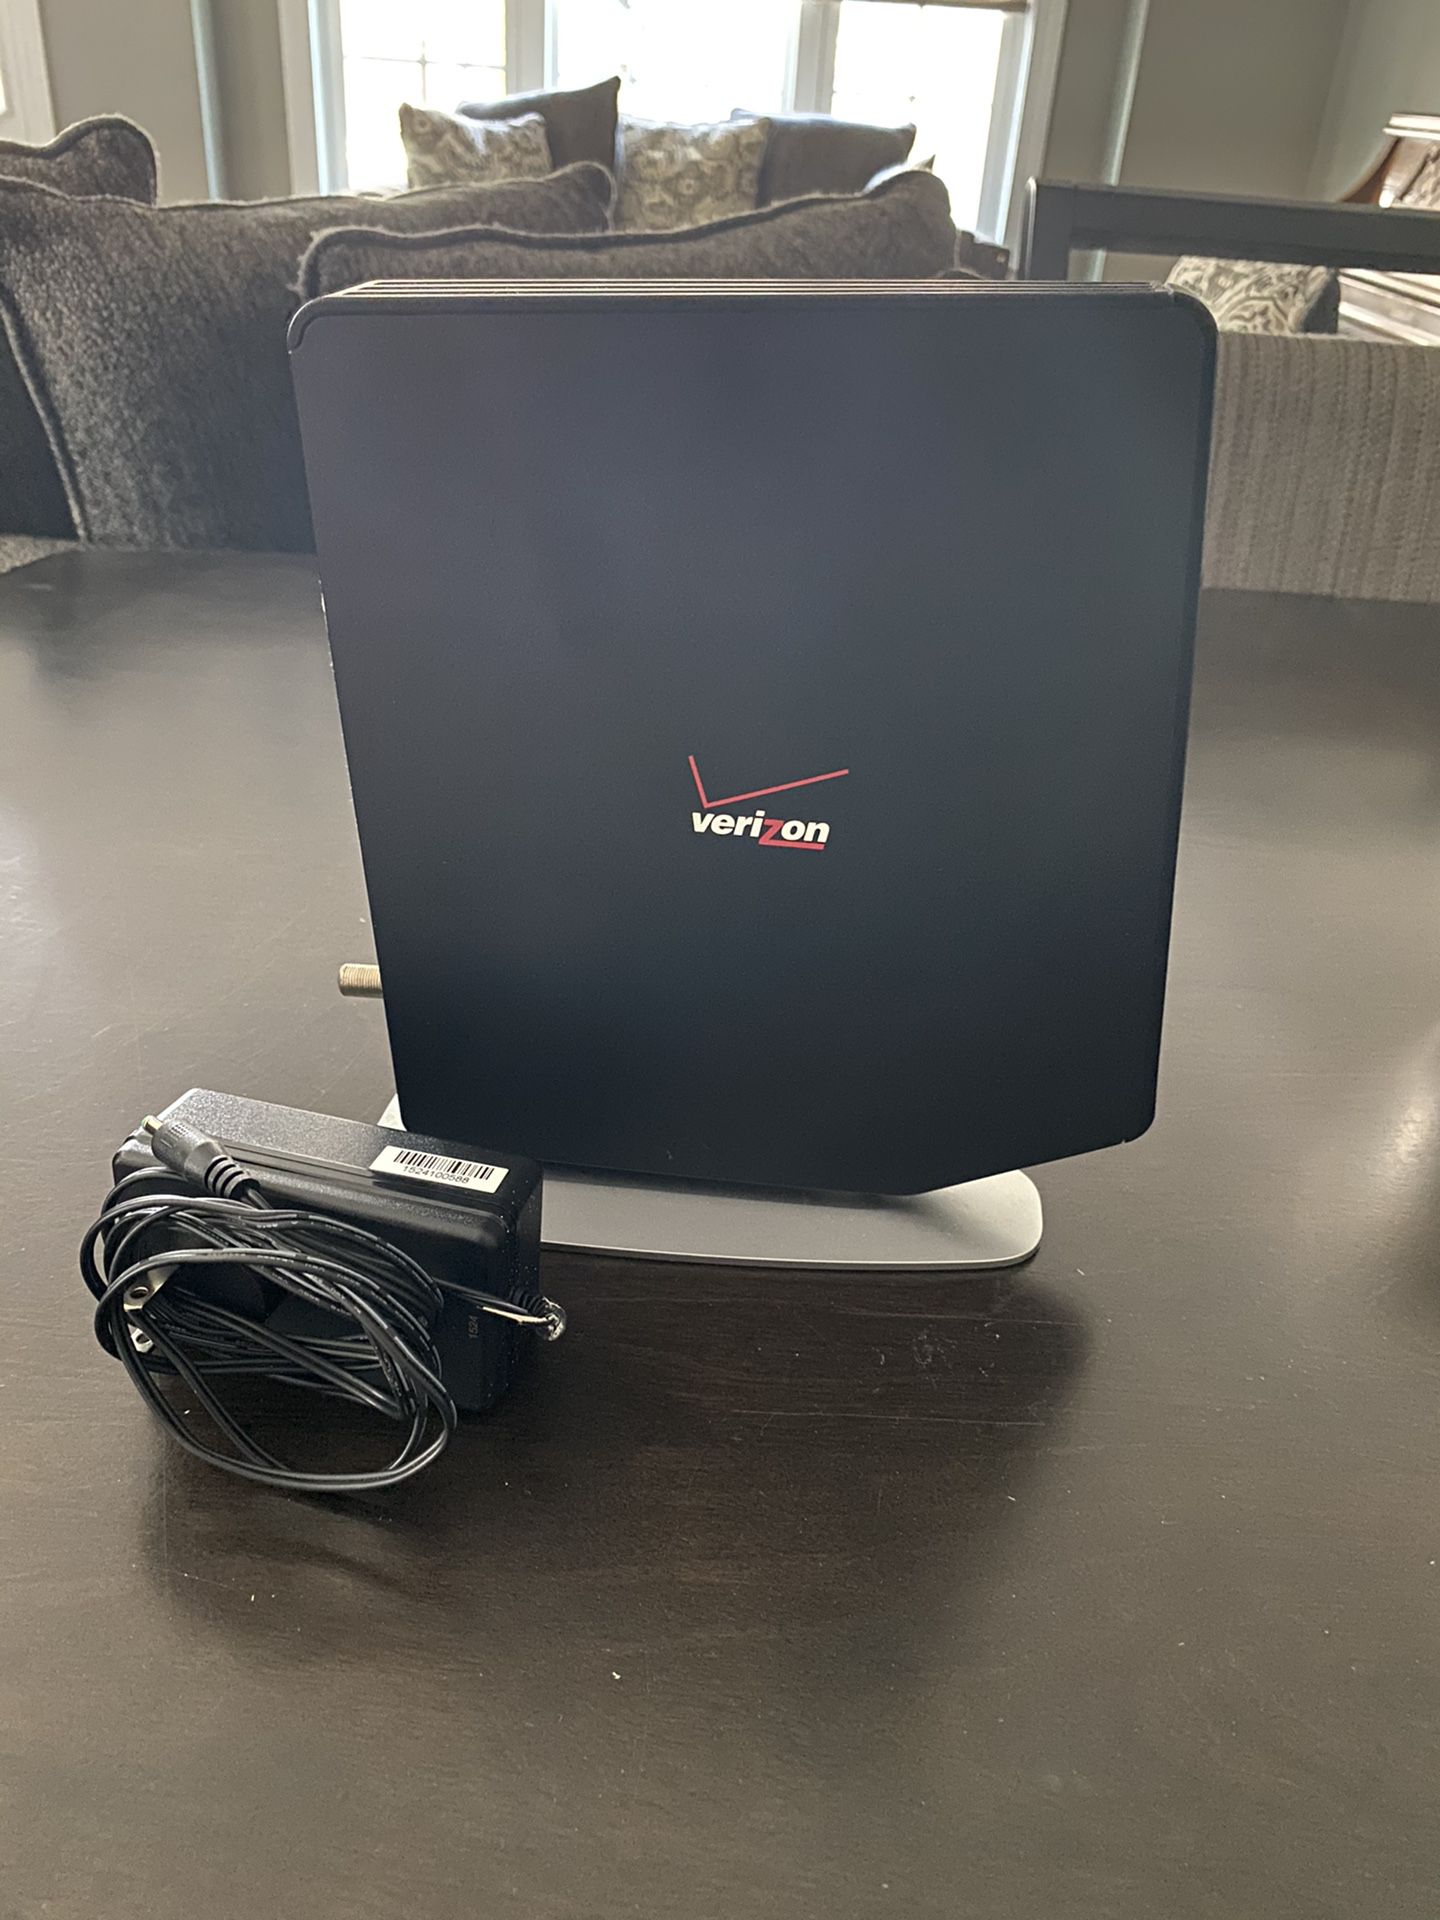 Verizon Fios router g1100 - works great